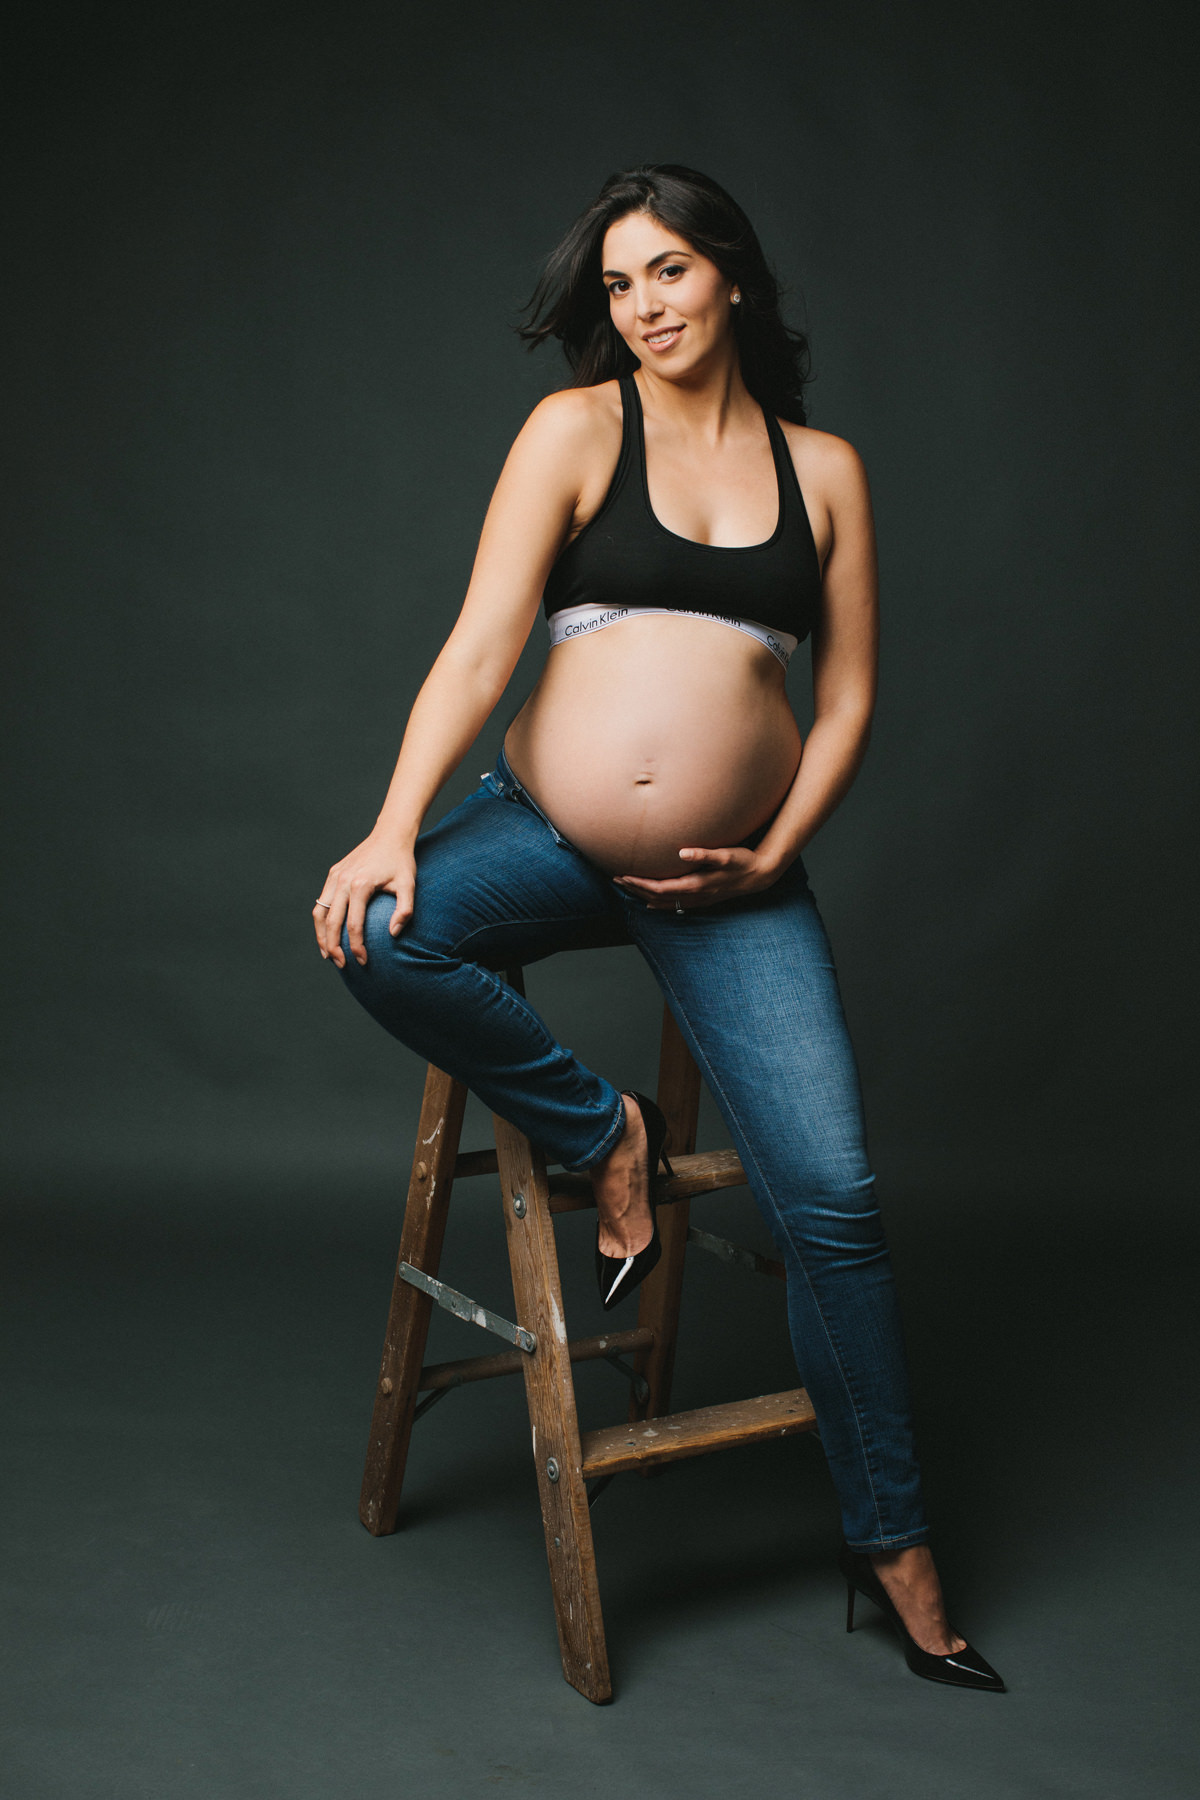 A modern maternity portrait of a mother to be. She is wearing black heals, denim and a black sports bra.